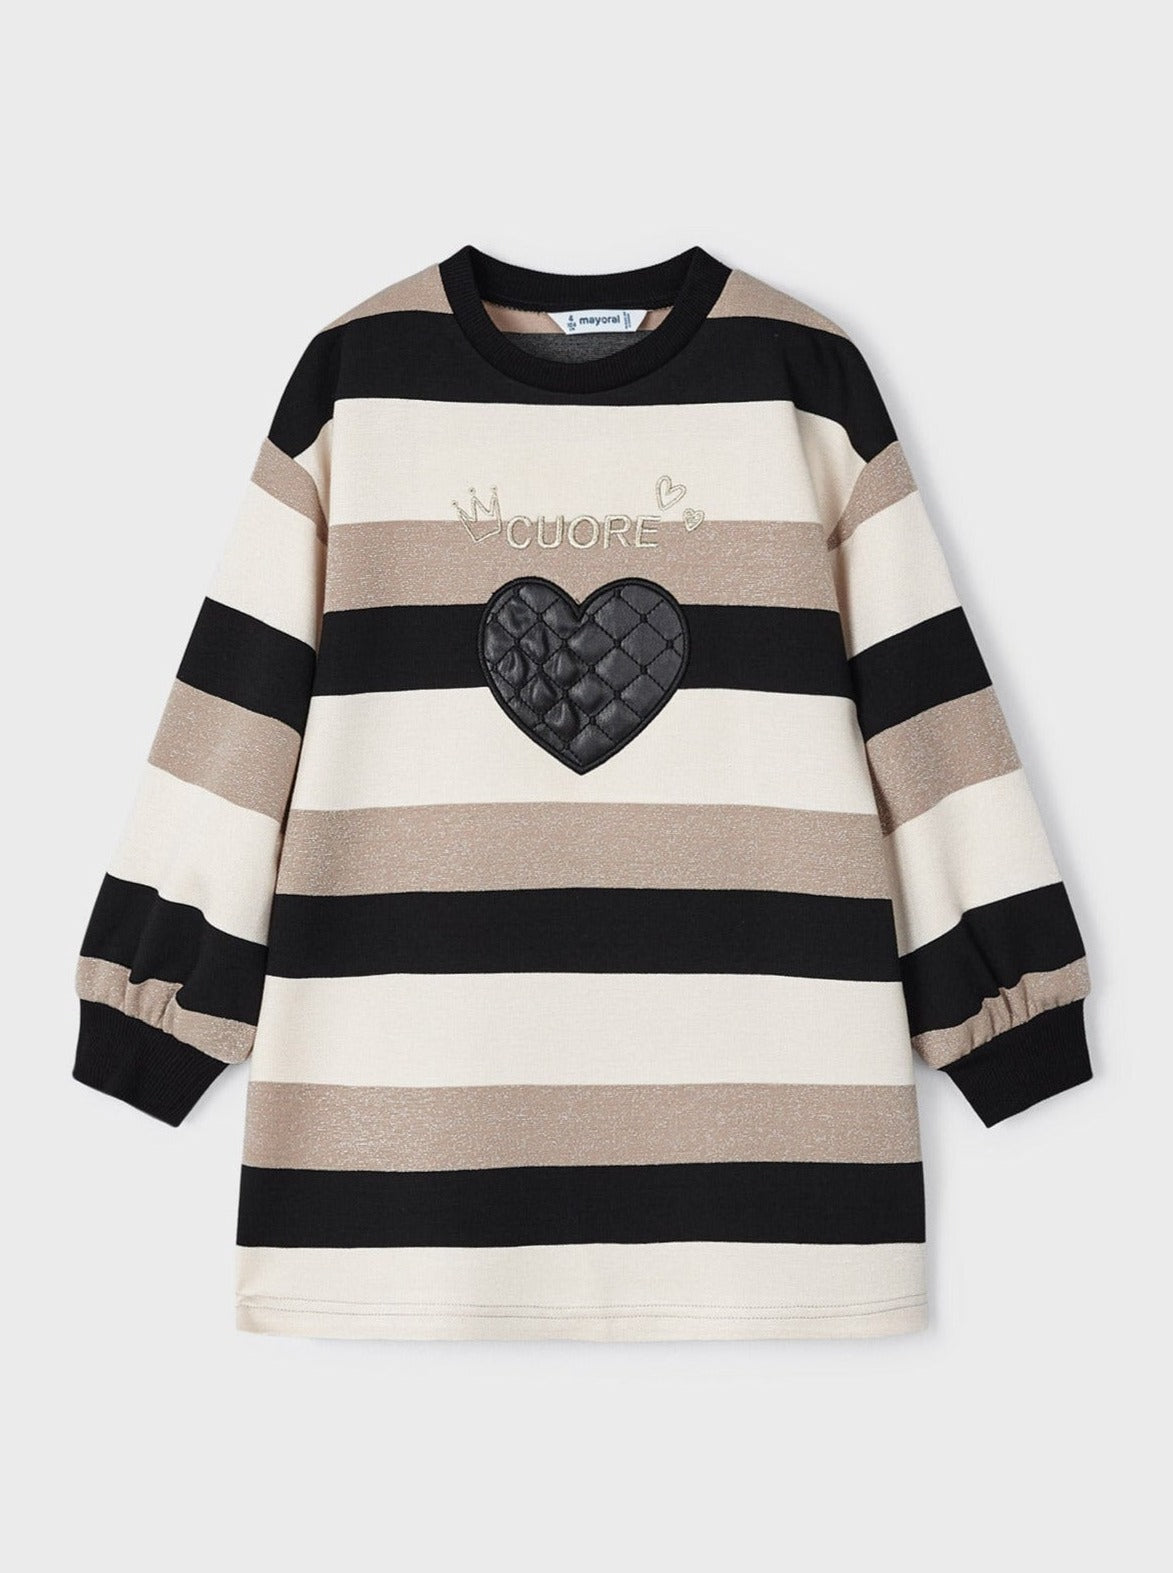 Mayoral Mini Black & Beige Quilted Heart Striped Sweater Dress _4930-46